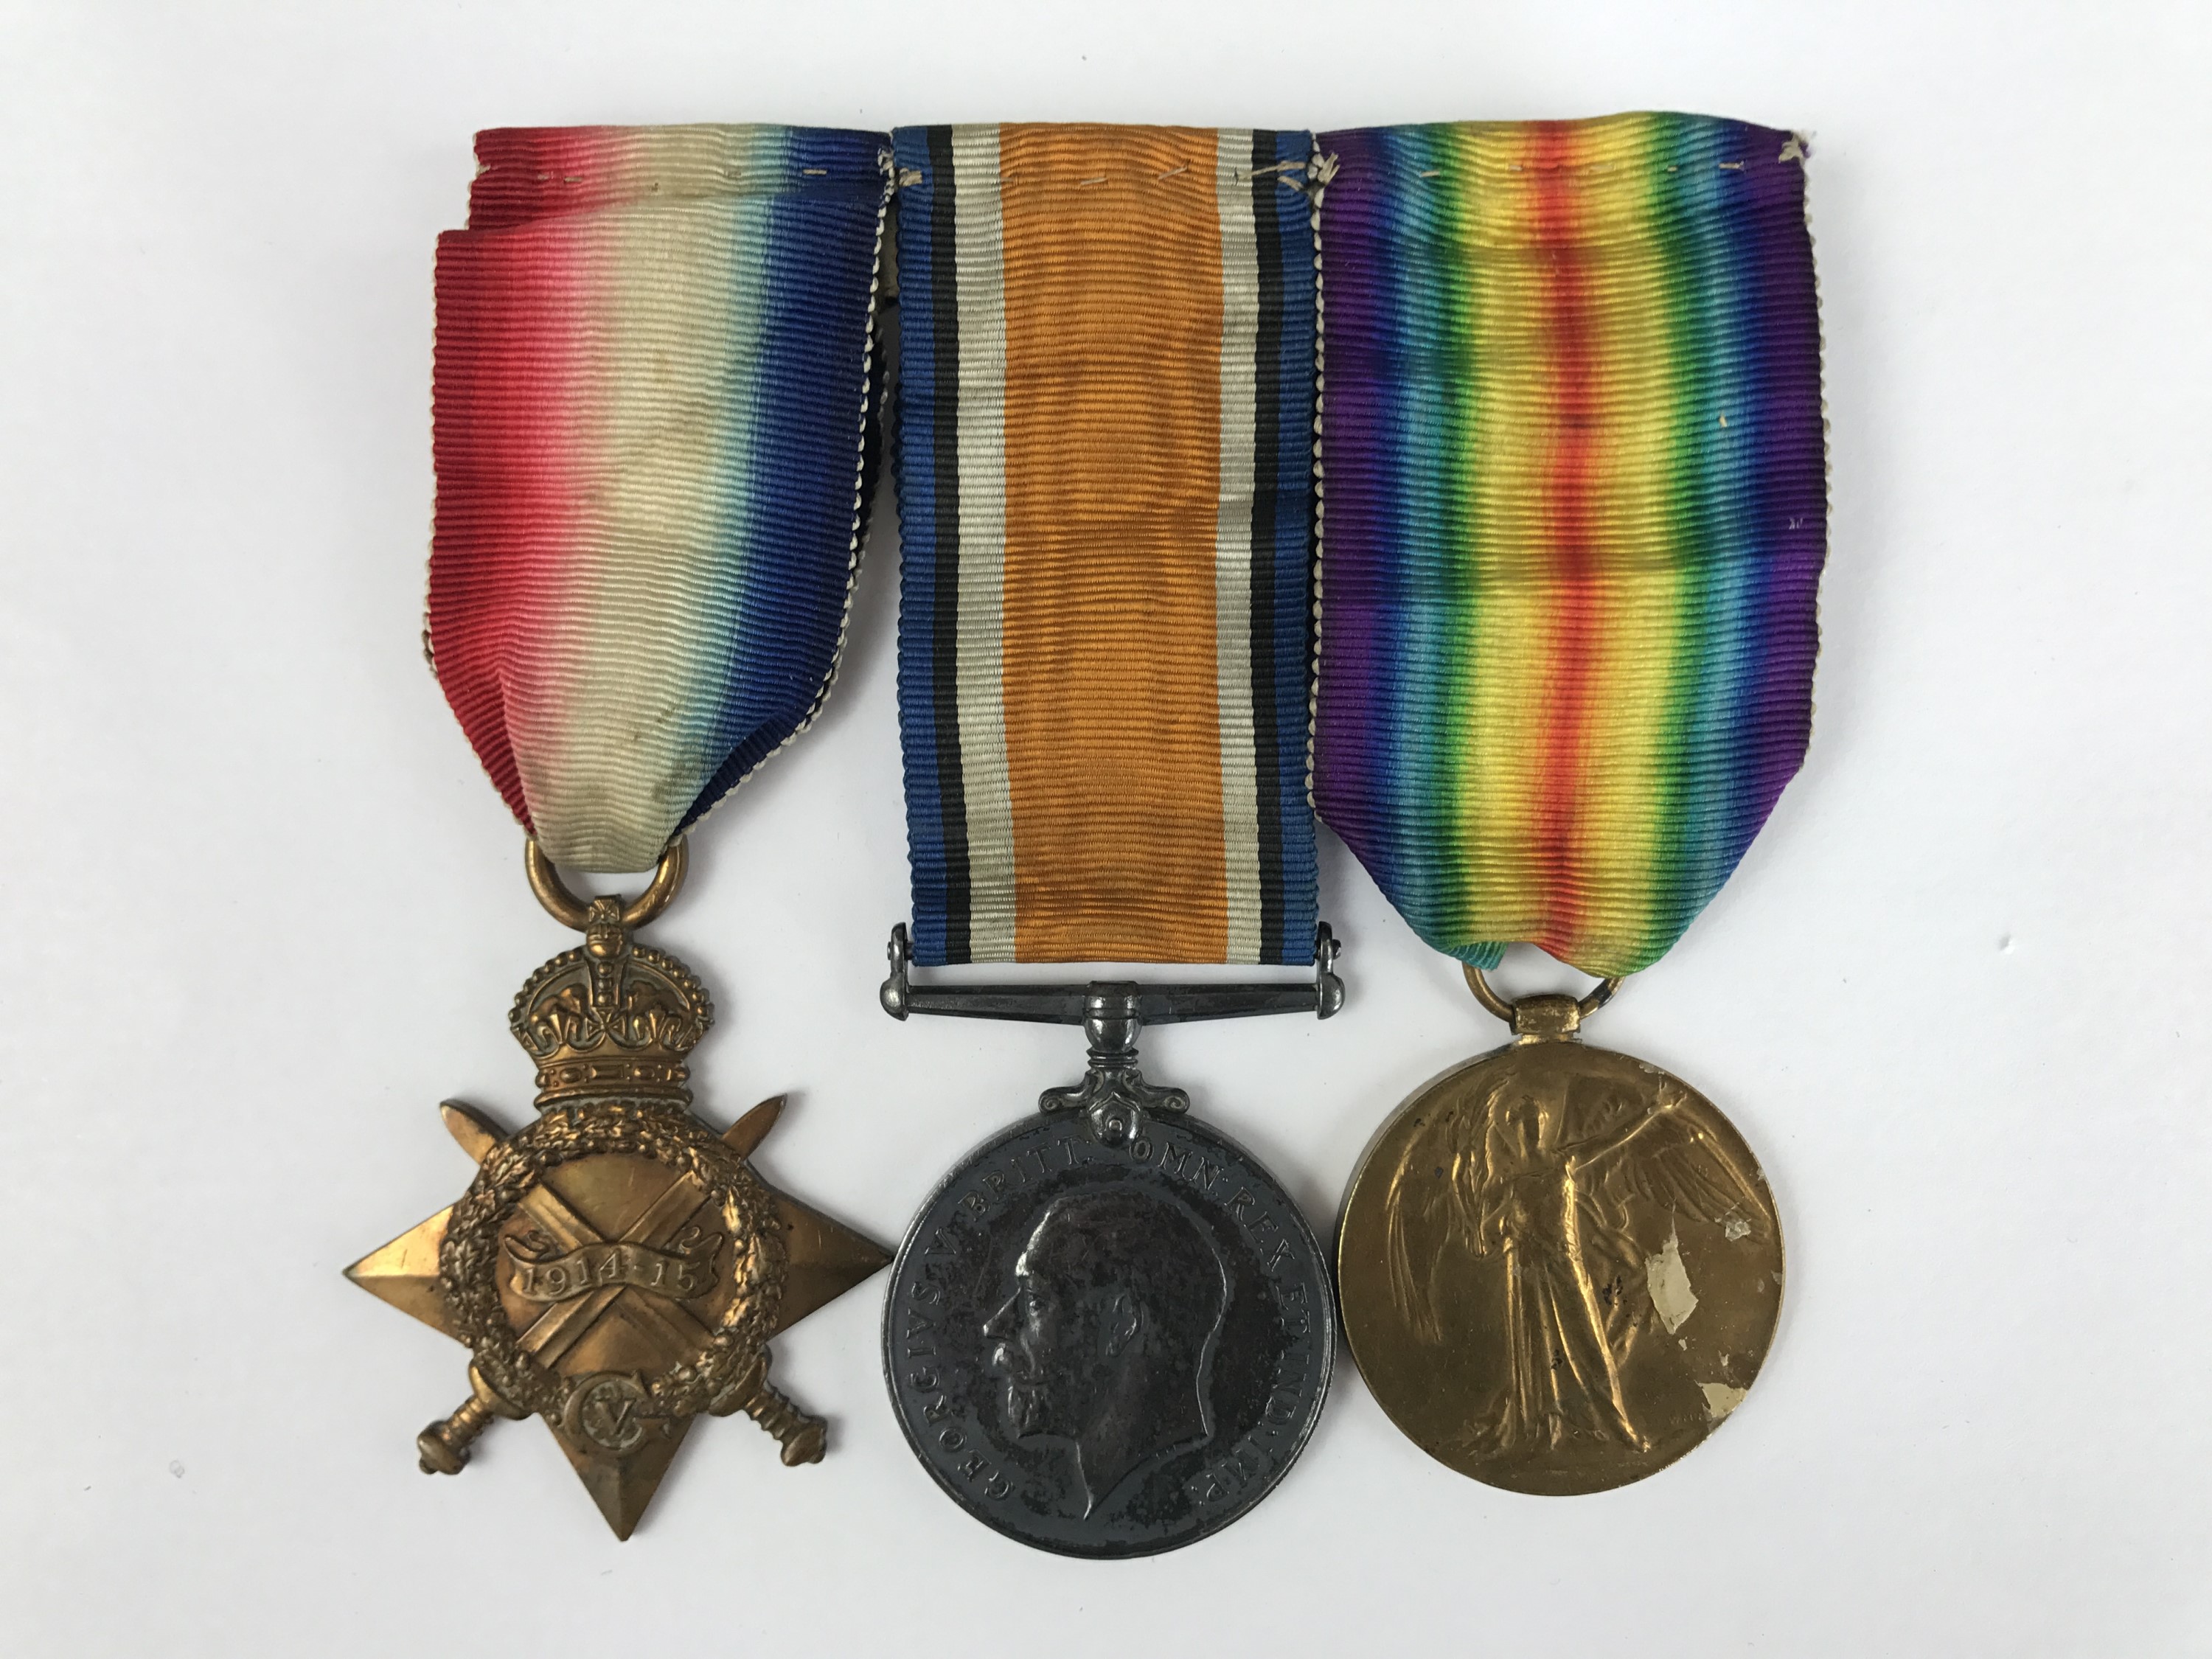 A 1914-15 Star, British War and Victory medals to 2126 Pte W J Reeves, Border Regiment